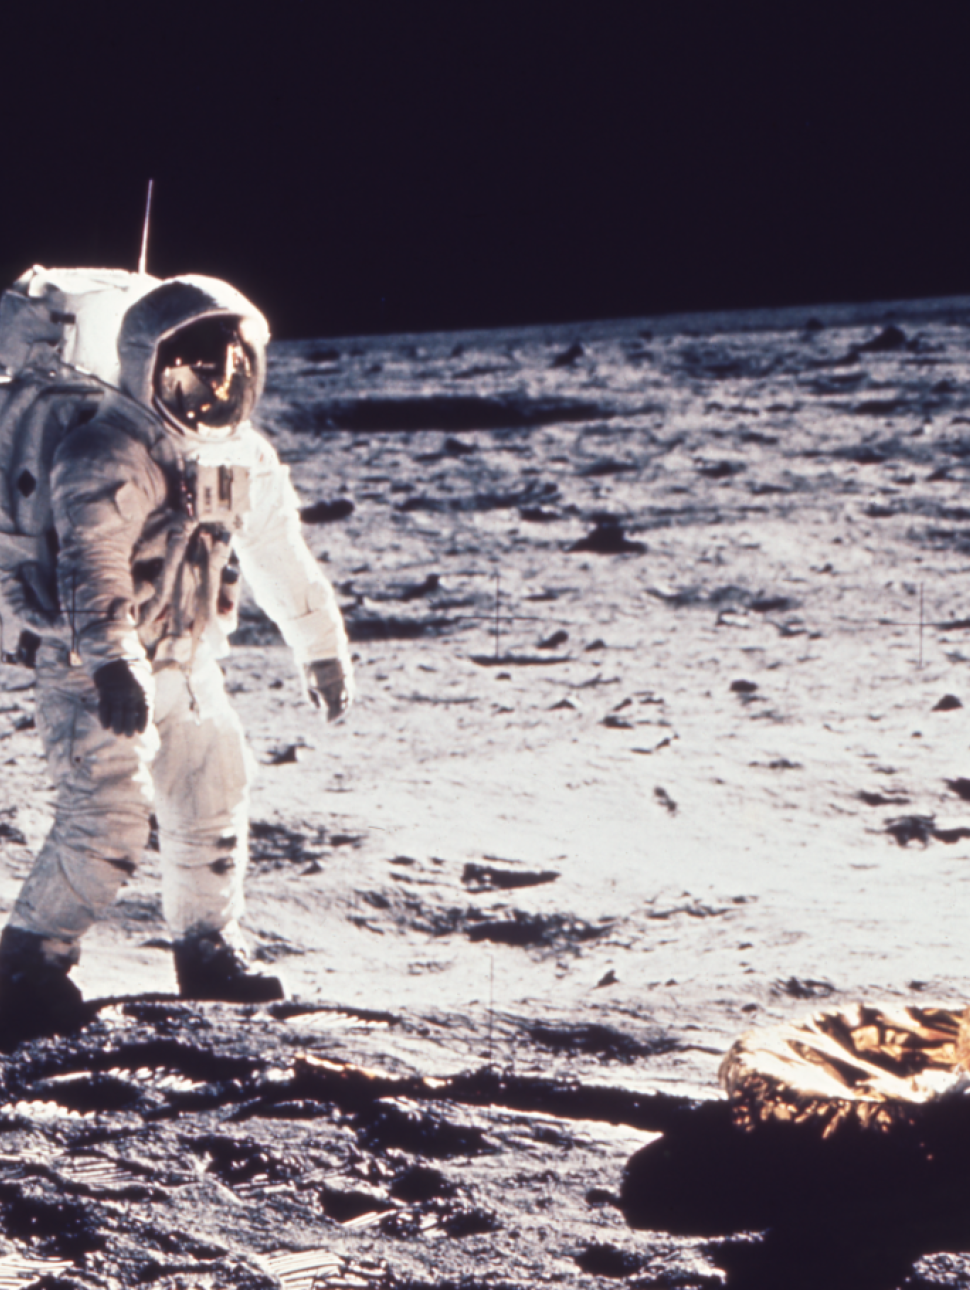 Image of an astronaut walking on the moon